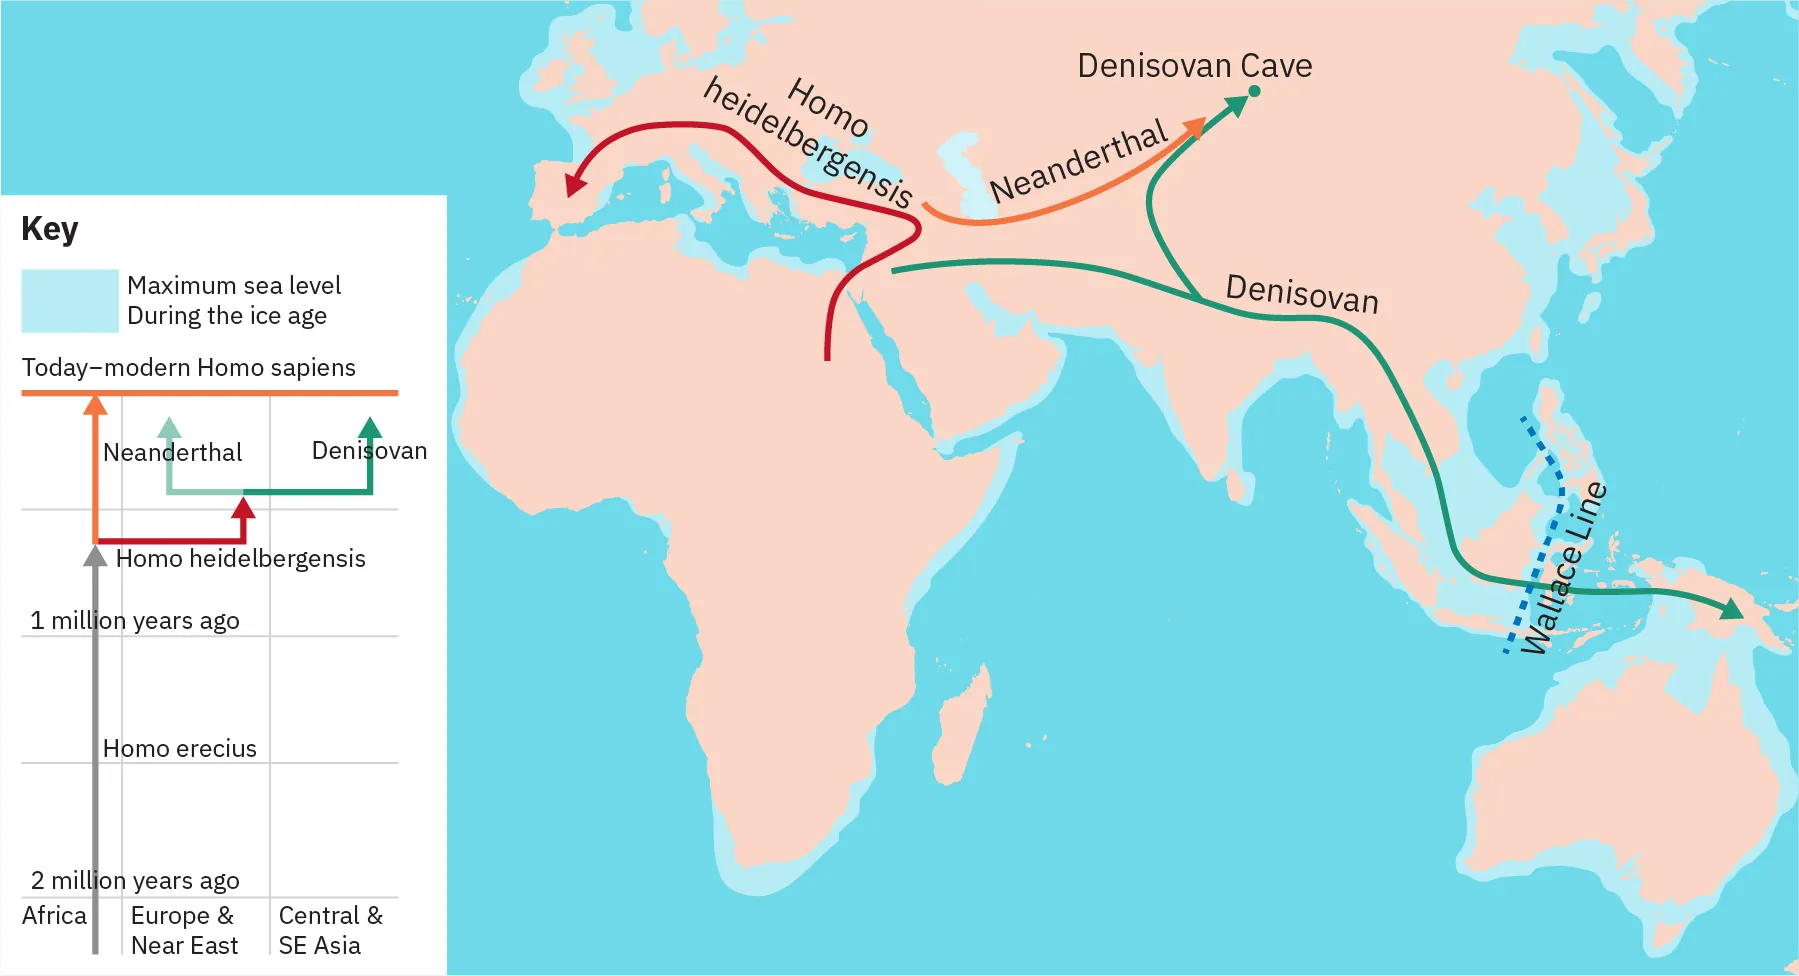 The phylogenetic tree shows a line stretching through time from 2 million years ago to “today-modern Homo sapiens.” Leading away from that line is a line for “Homo heidelbergensis. ” This line in turn branches off into lines for “Neanderthal” and “Denisovan”. The map depicts Denisovans migrating from the Middle East through the Indian sub-continent and to New Zealand. A branch off of the Denisovan path leads into Russia. Neanderthals are shown to have migrated from the Middle East into Russia. Homo heideibergensis is shown to have migrated from Africa, through the Middle East, and into Europe, all the way to Spain.